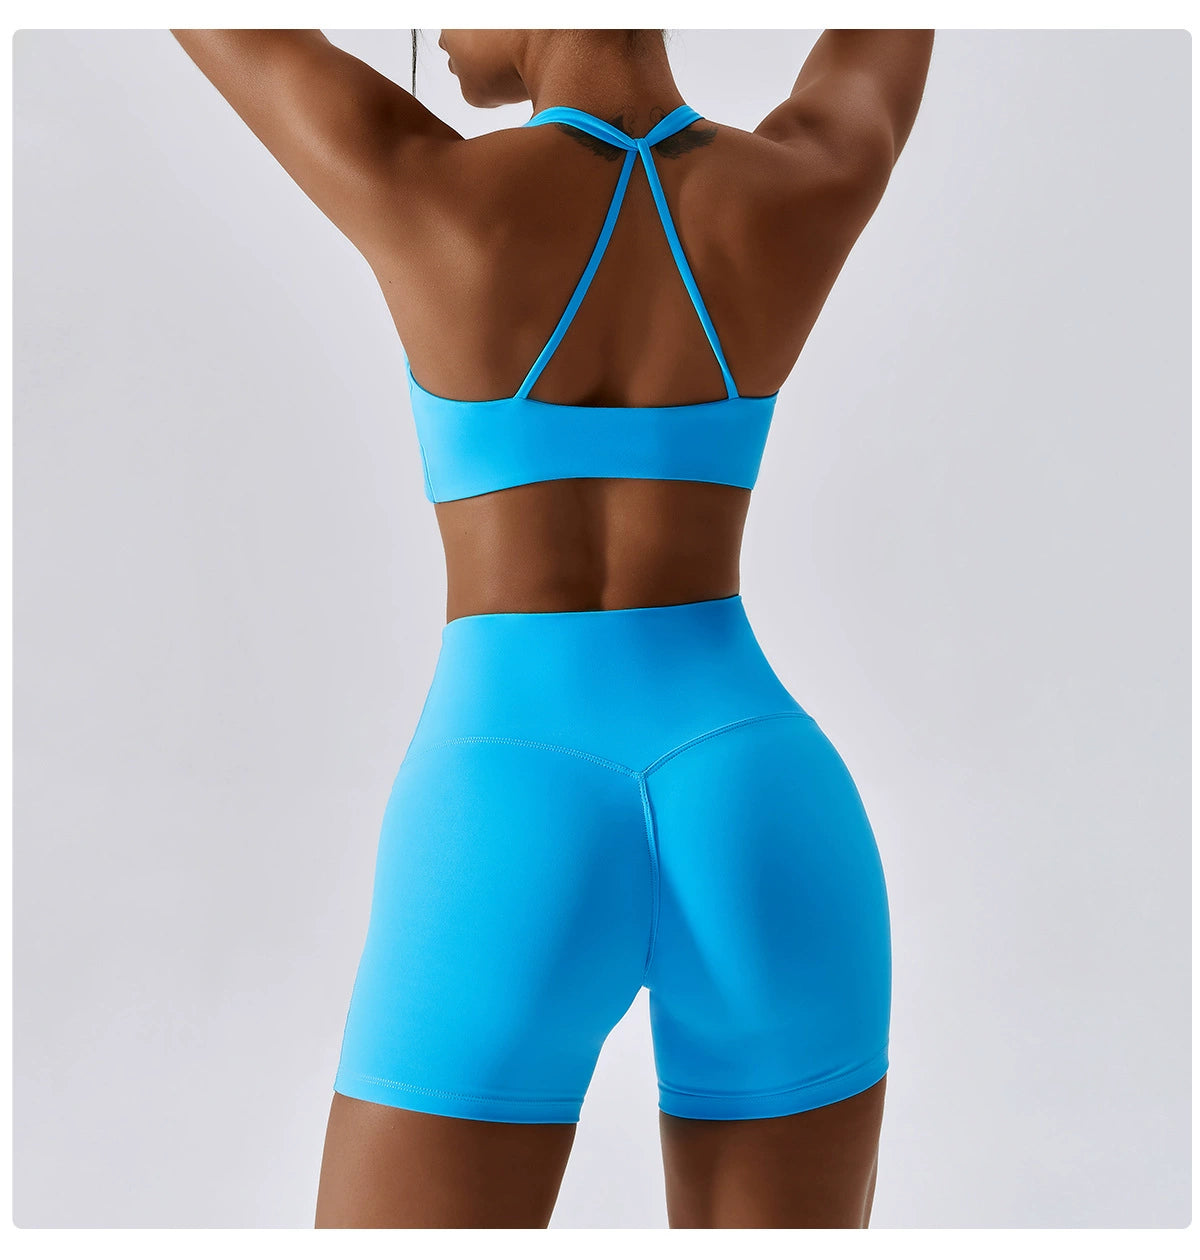 Women Quick-Drying Nude Feel Candy Color Yoga Suit Sexy Sports Running Fitness Two-piece Set